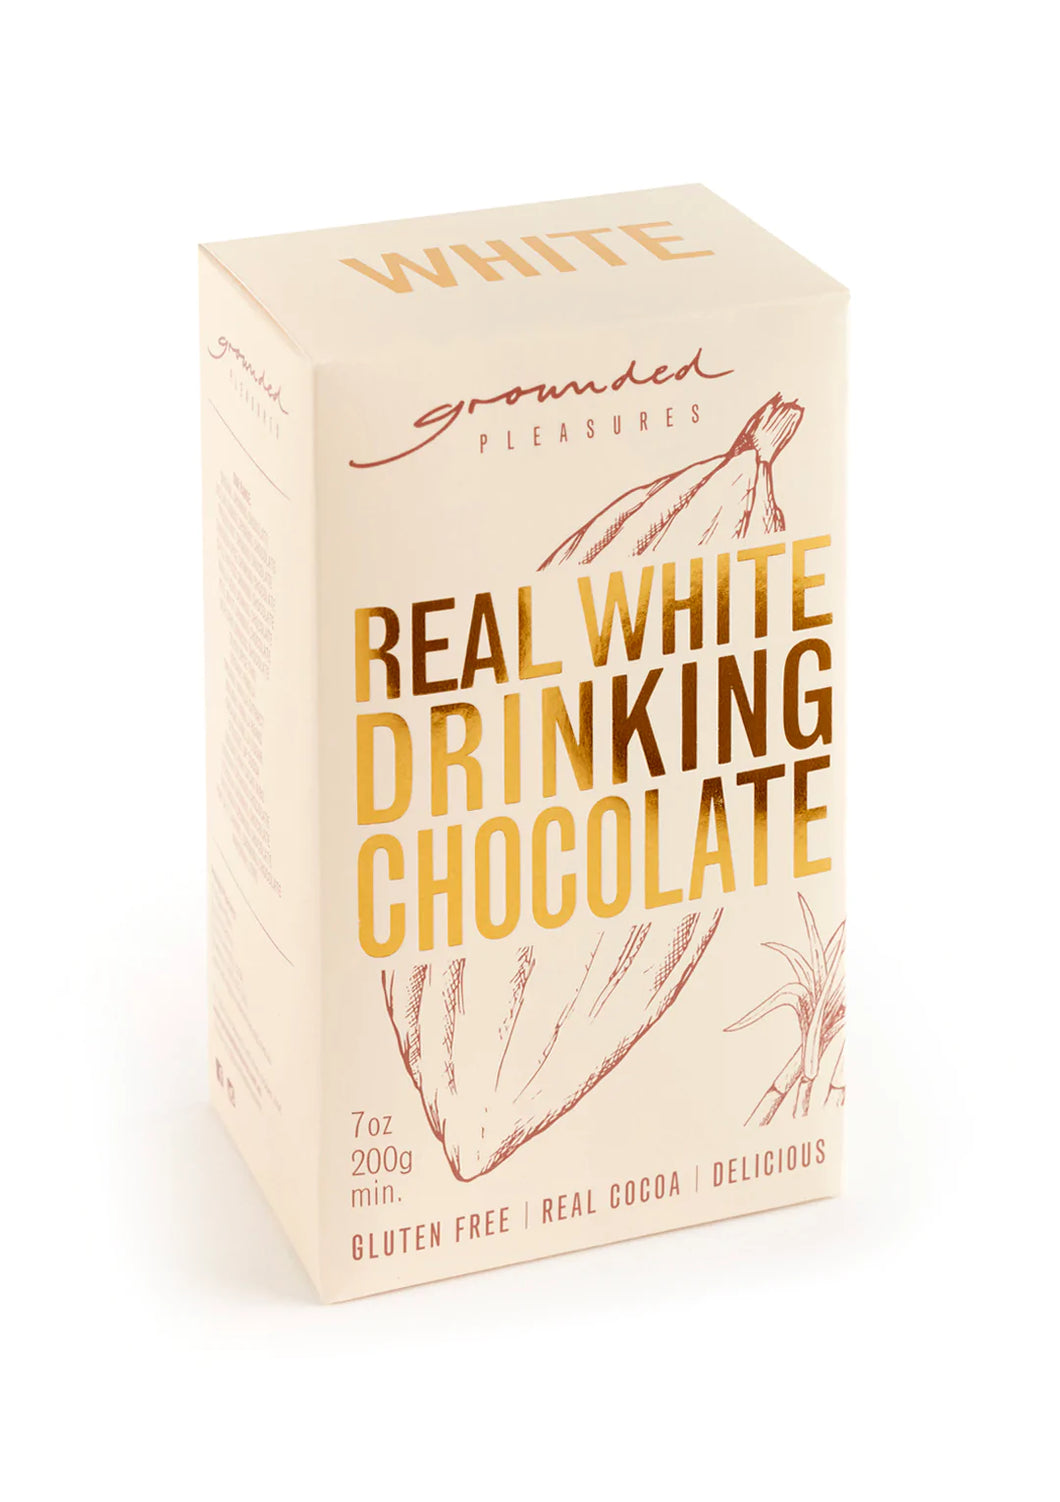 Grounded Pleasures- REAL WHITE DRINKING CHOCOLATE